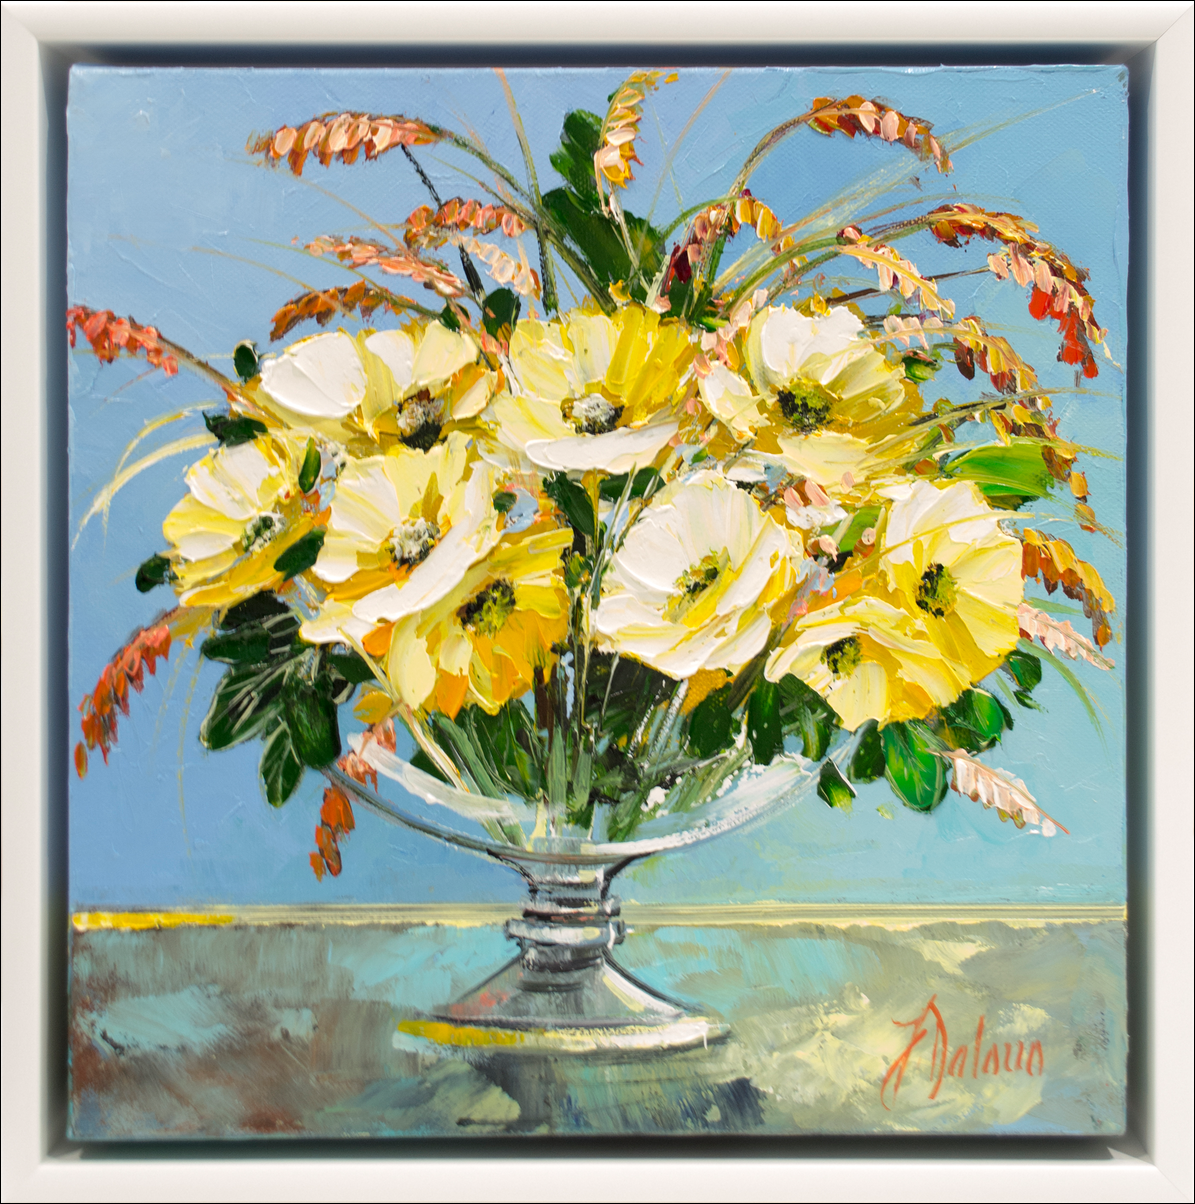 Framed Front View Of Still Life Painting "Yellow Blossom" By Judith Dalozzo